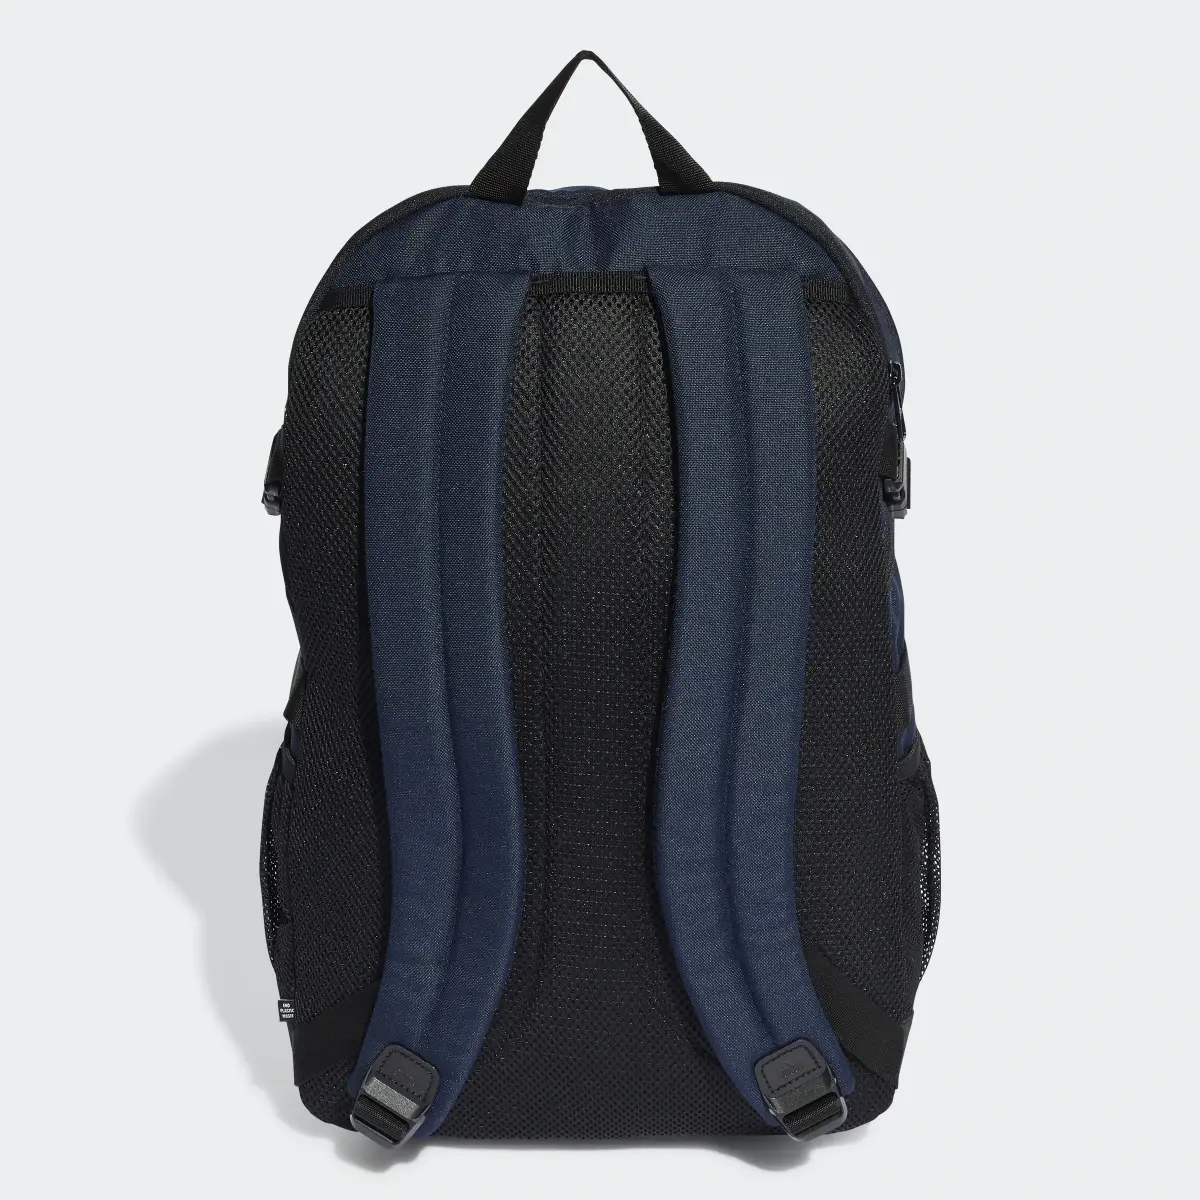 Adidas Power Backpack. 3